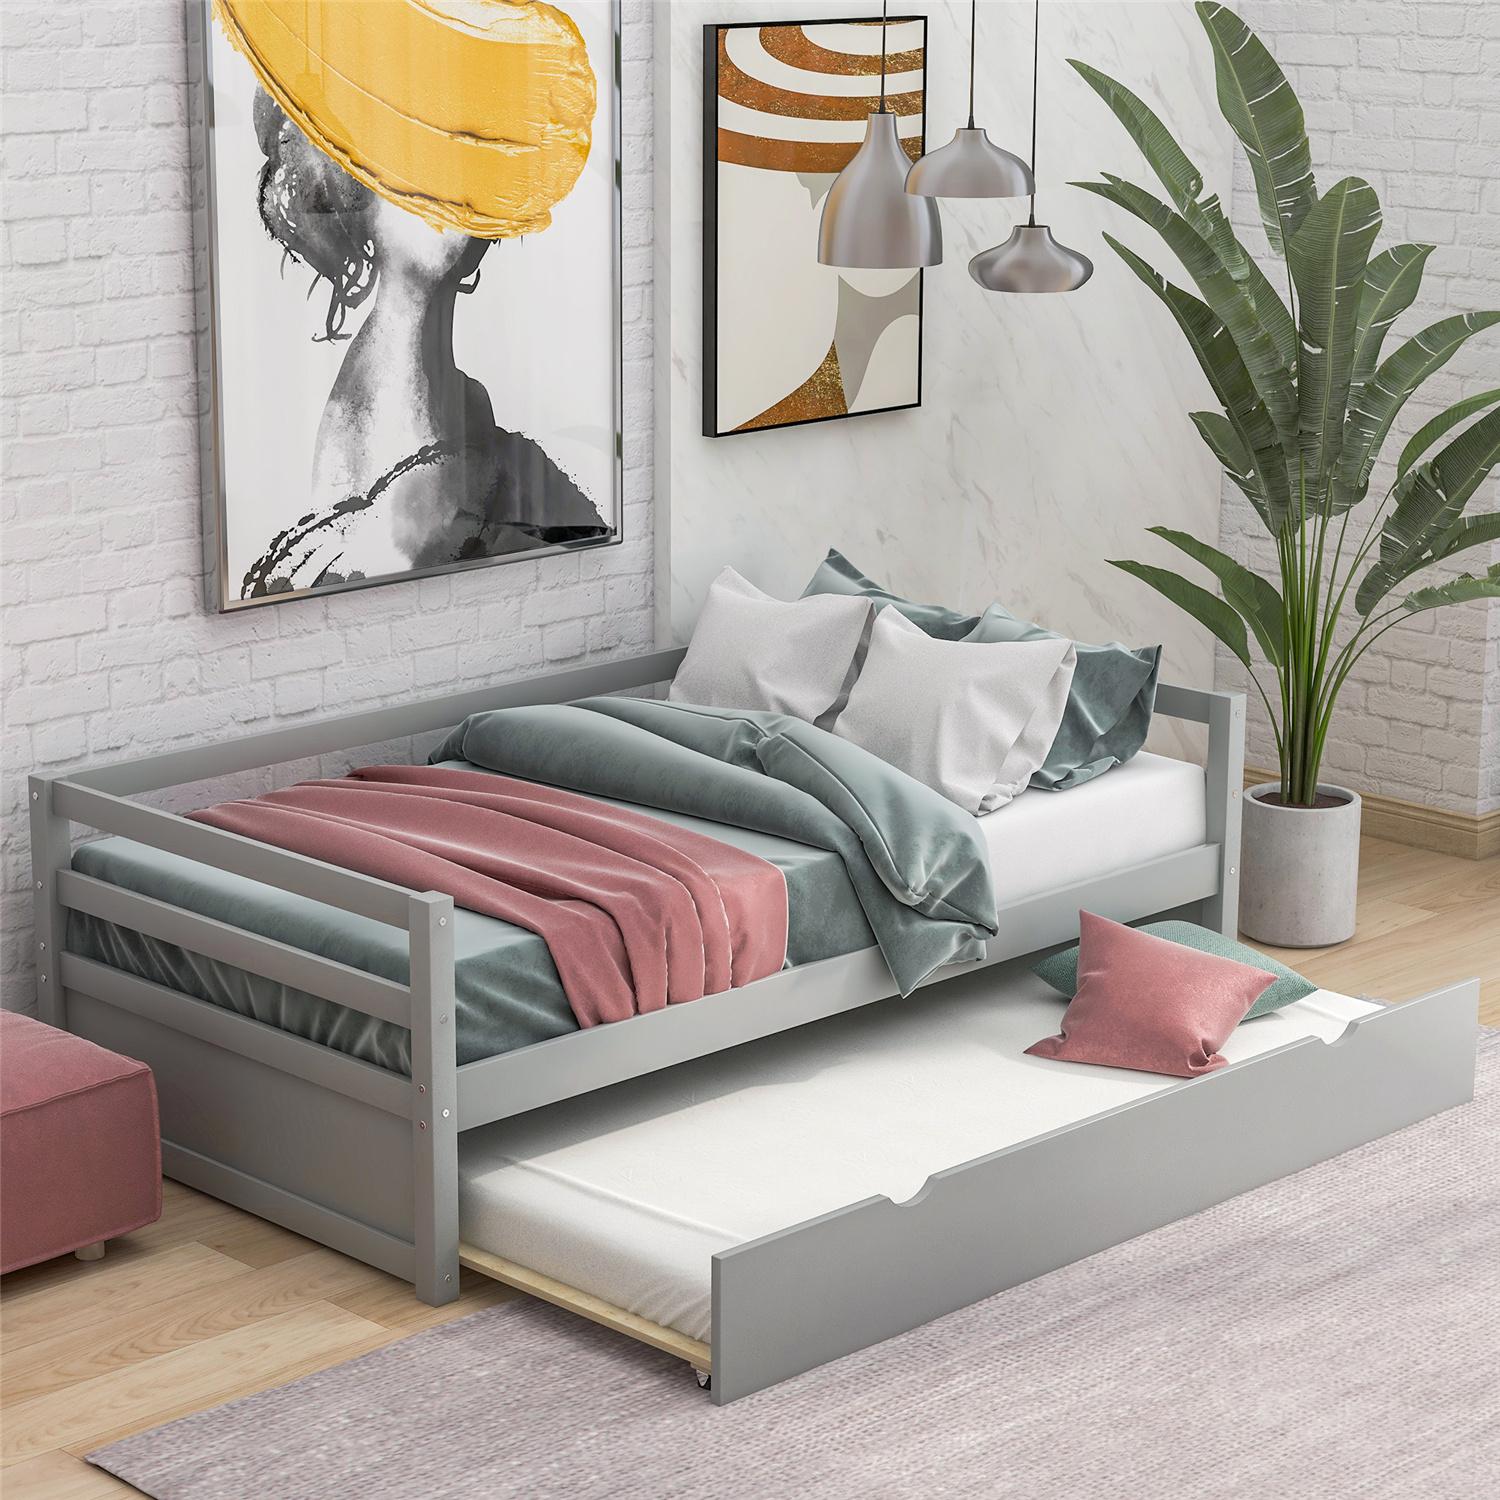 ARCTICSCORPION Twin Size Daybed with Pull Out Trundle,Wood Bed Frame with Backboard, Pull-out Combination Bed with Casters with Wooden Slat Support for Kids Room, No Box Spring Needed, Gray Finish - image 1 of 7